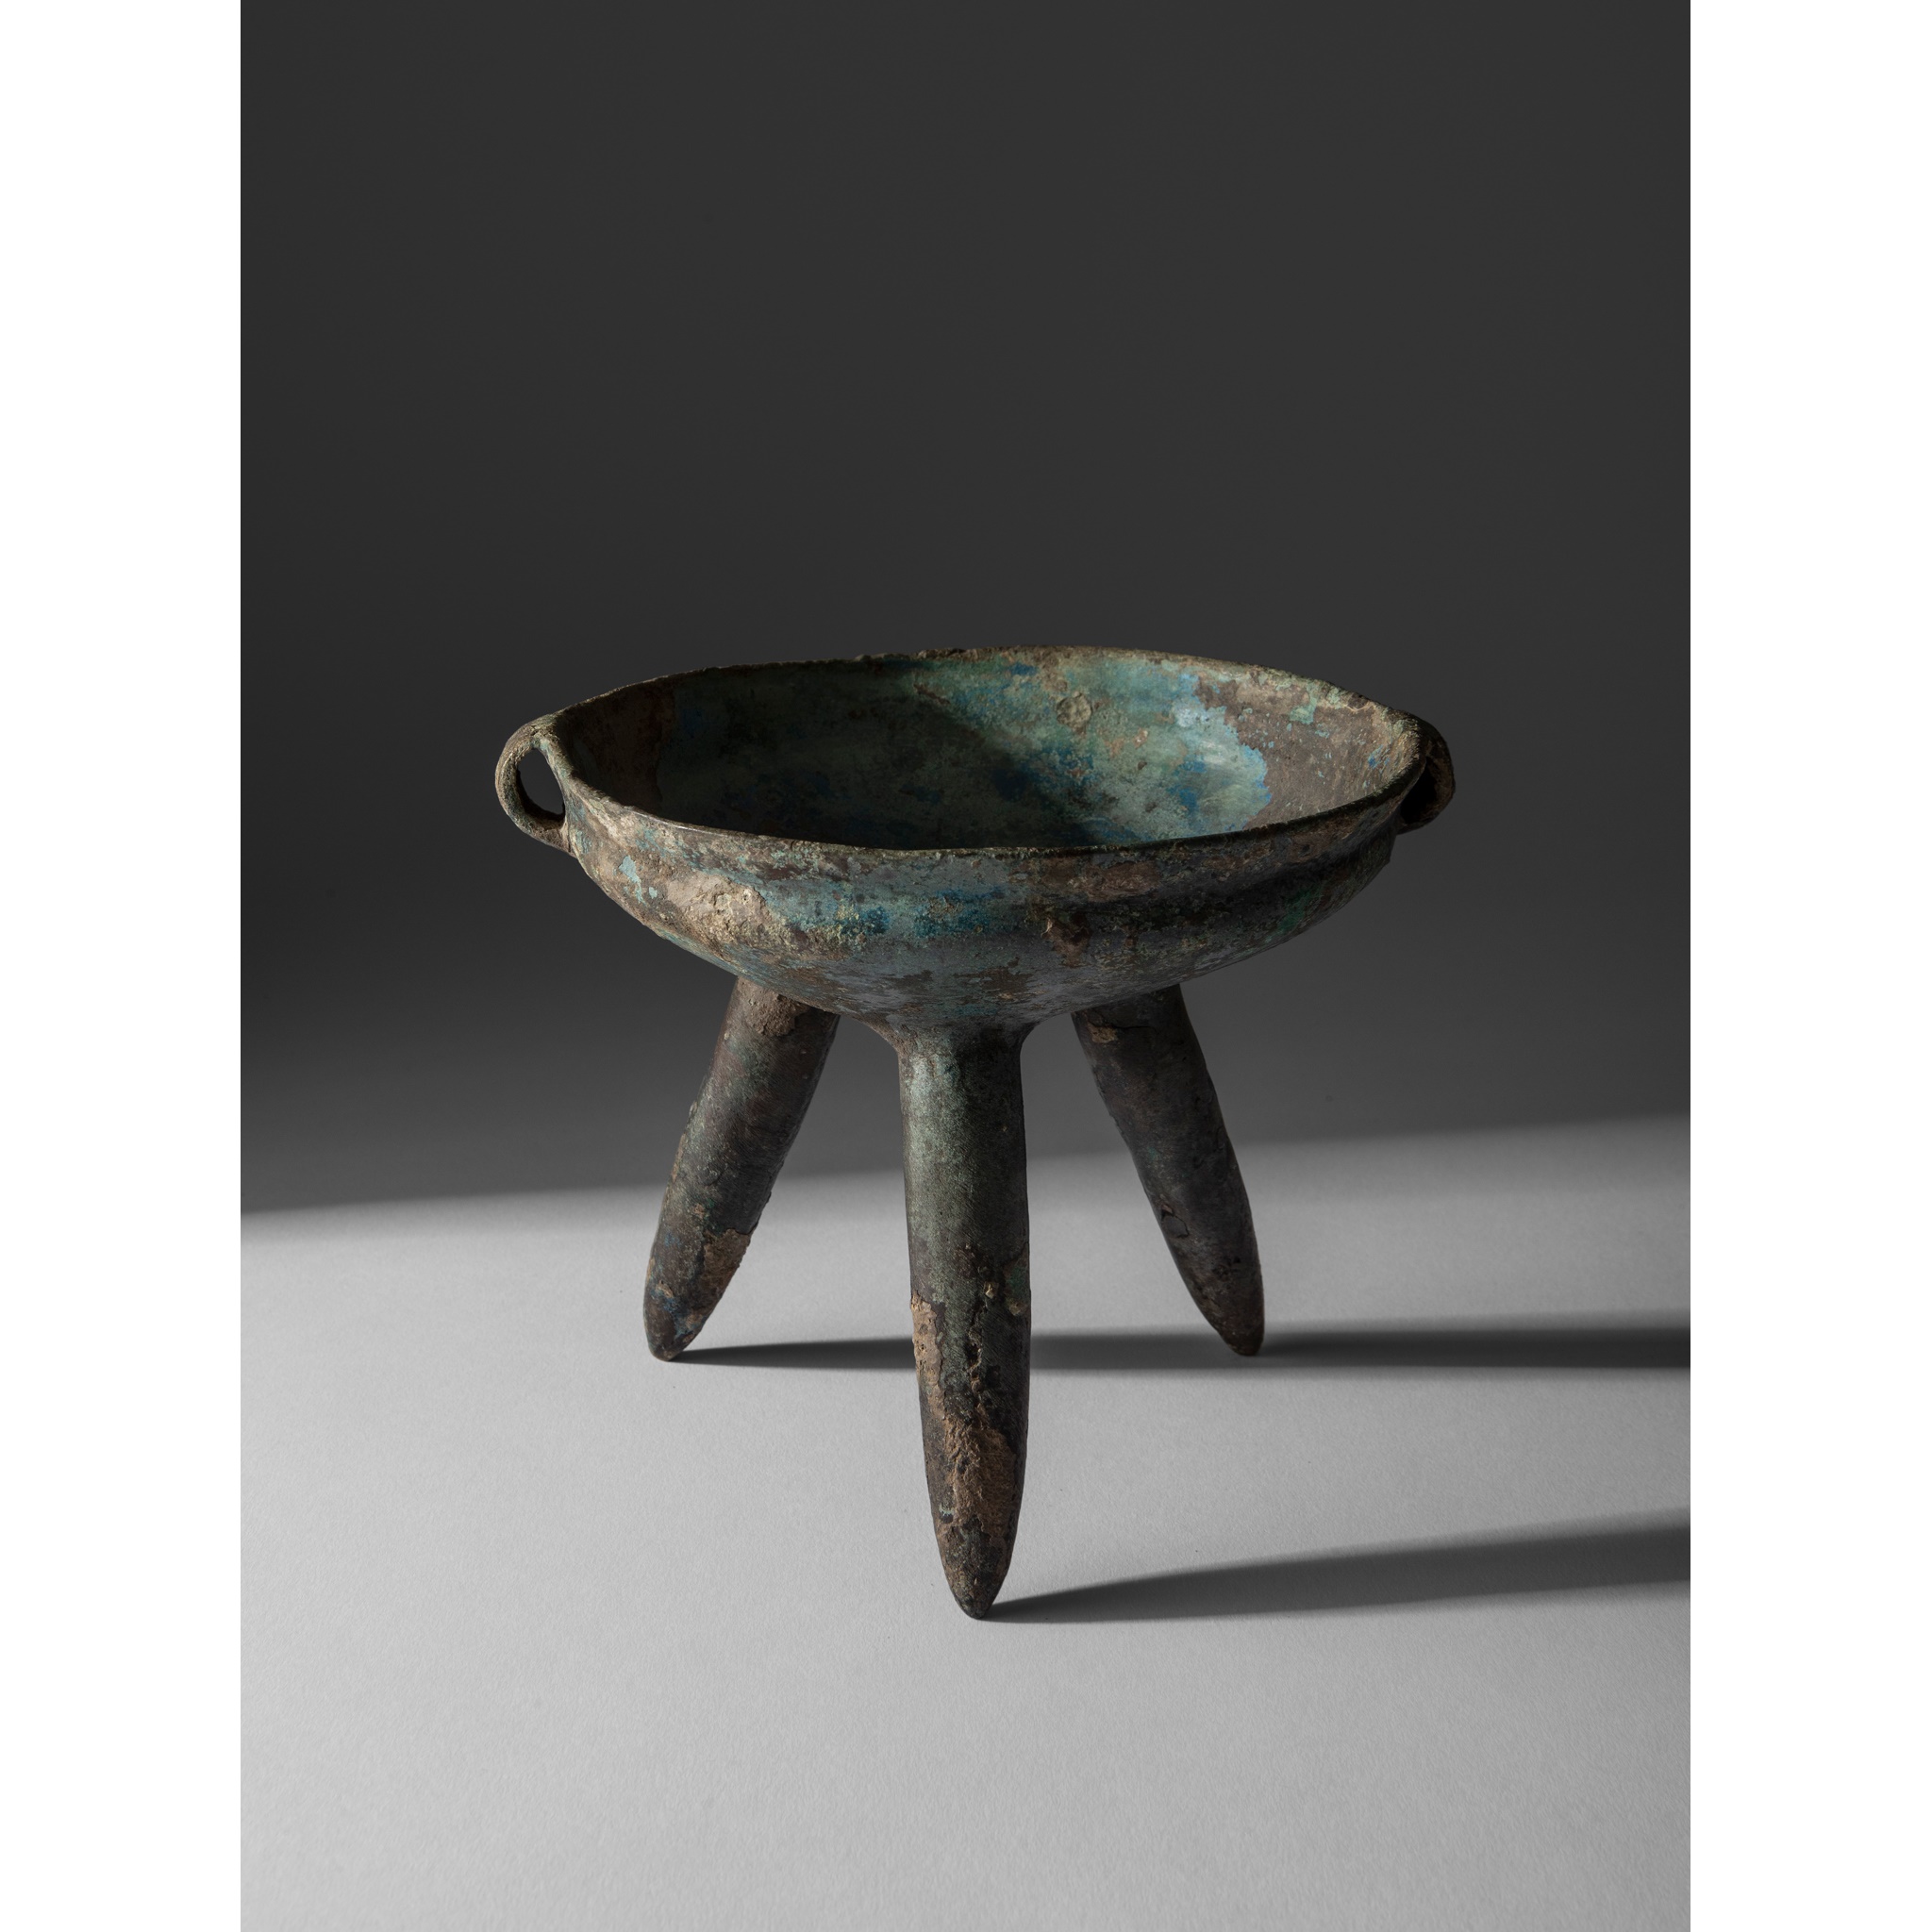 VERY RARE BRONZE RITUAL TRIPOD VESSEL NEOLITHIC-TO-BRONZE-AGE-STYLE, MONGOLIA, DONGHU TRIBE